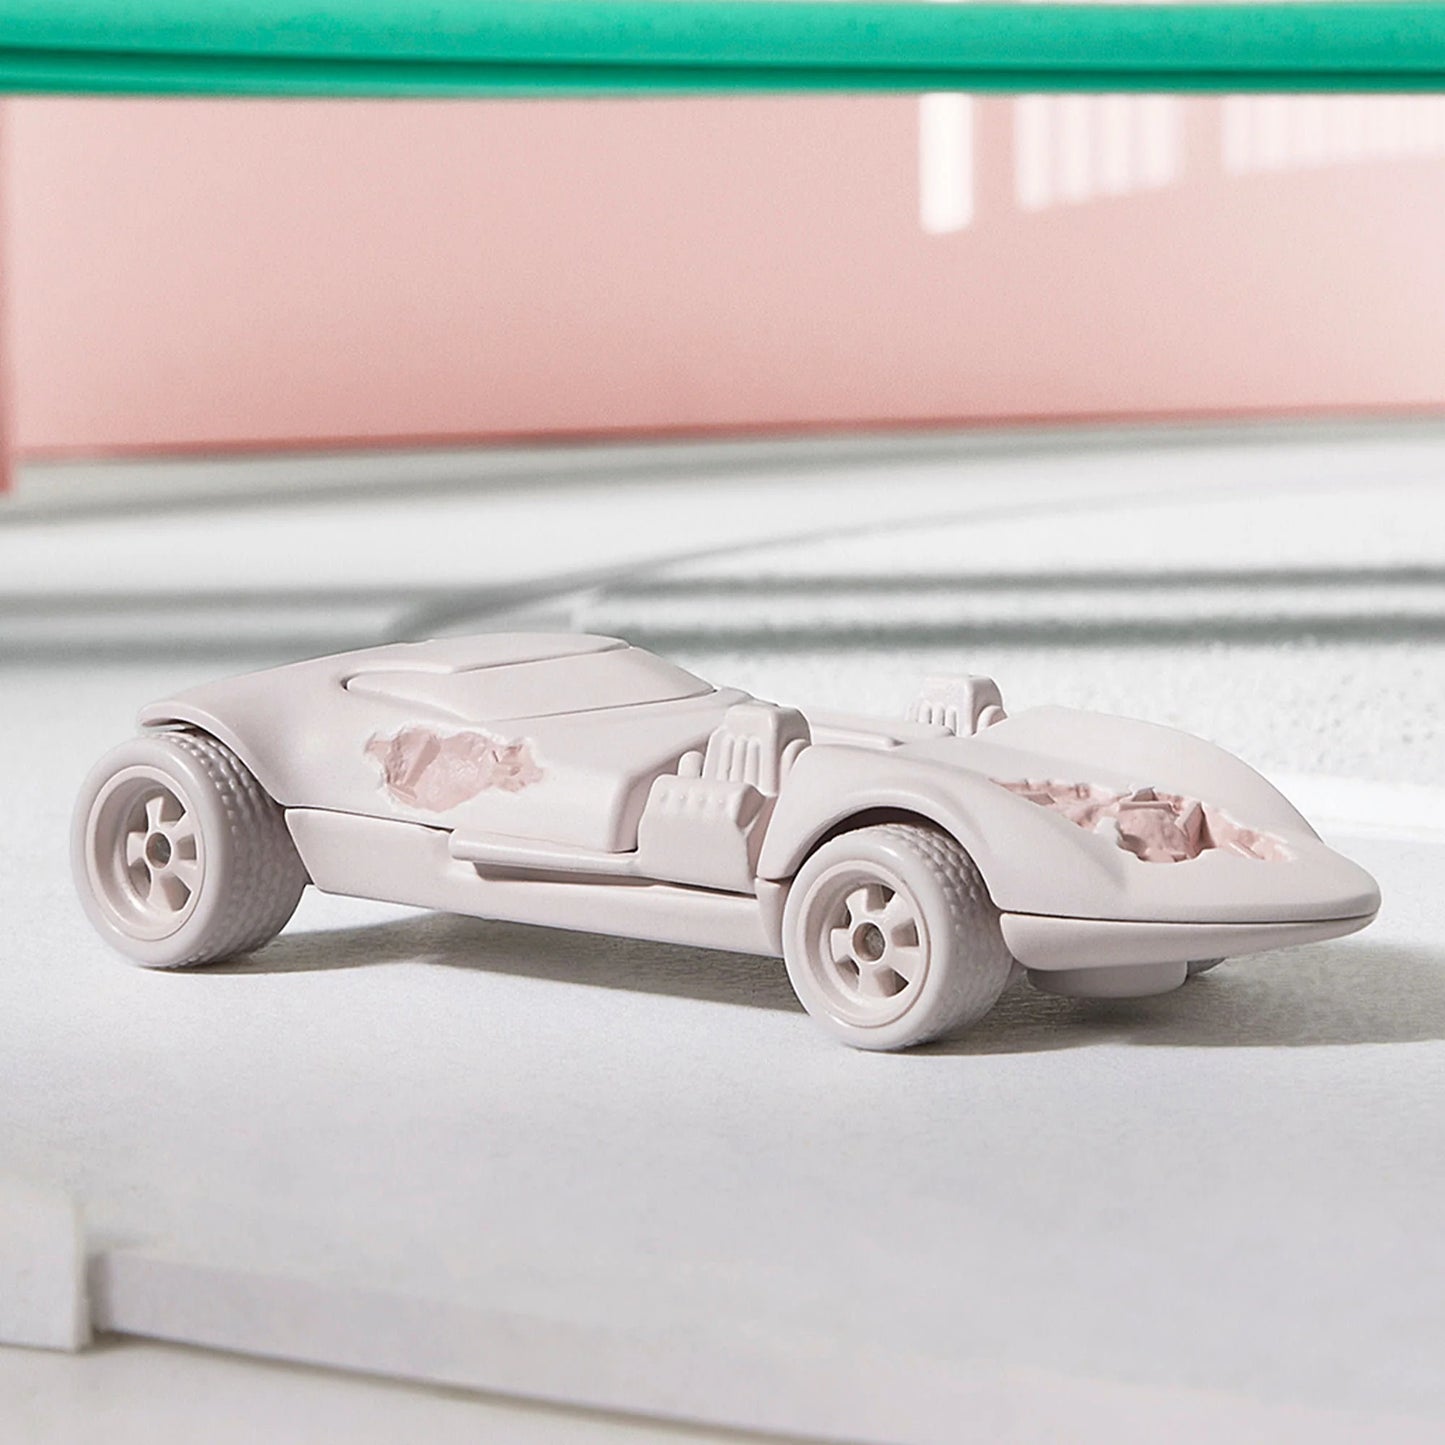 Daniel Arsham x Hot Wheels  Eroded Twin Mill, 2024 Features: Crystallized erosions Body Color: Arsham Pink Body Type: Silkstone Chassis: ZAMAC Wheels: Arsham pink Real Riders 5-spoke classic wheels Scale 1:64 Includes sealing label and Certificate of Authenticity Packaged in a collector display case with simulated concrete base.